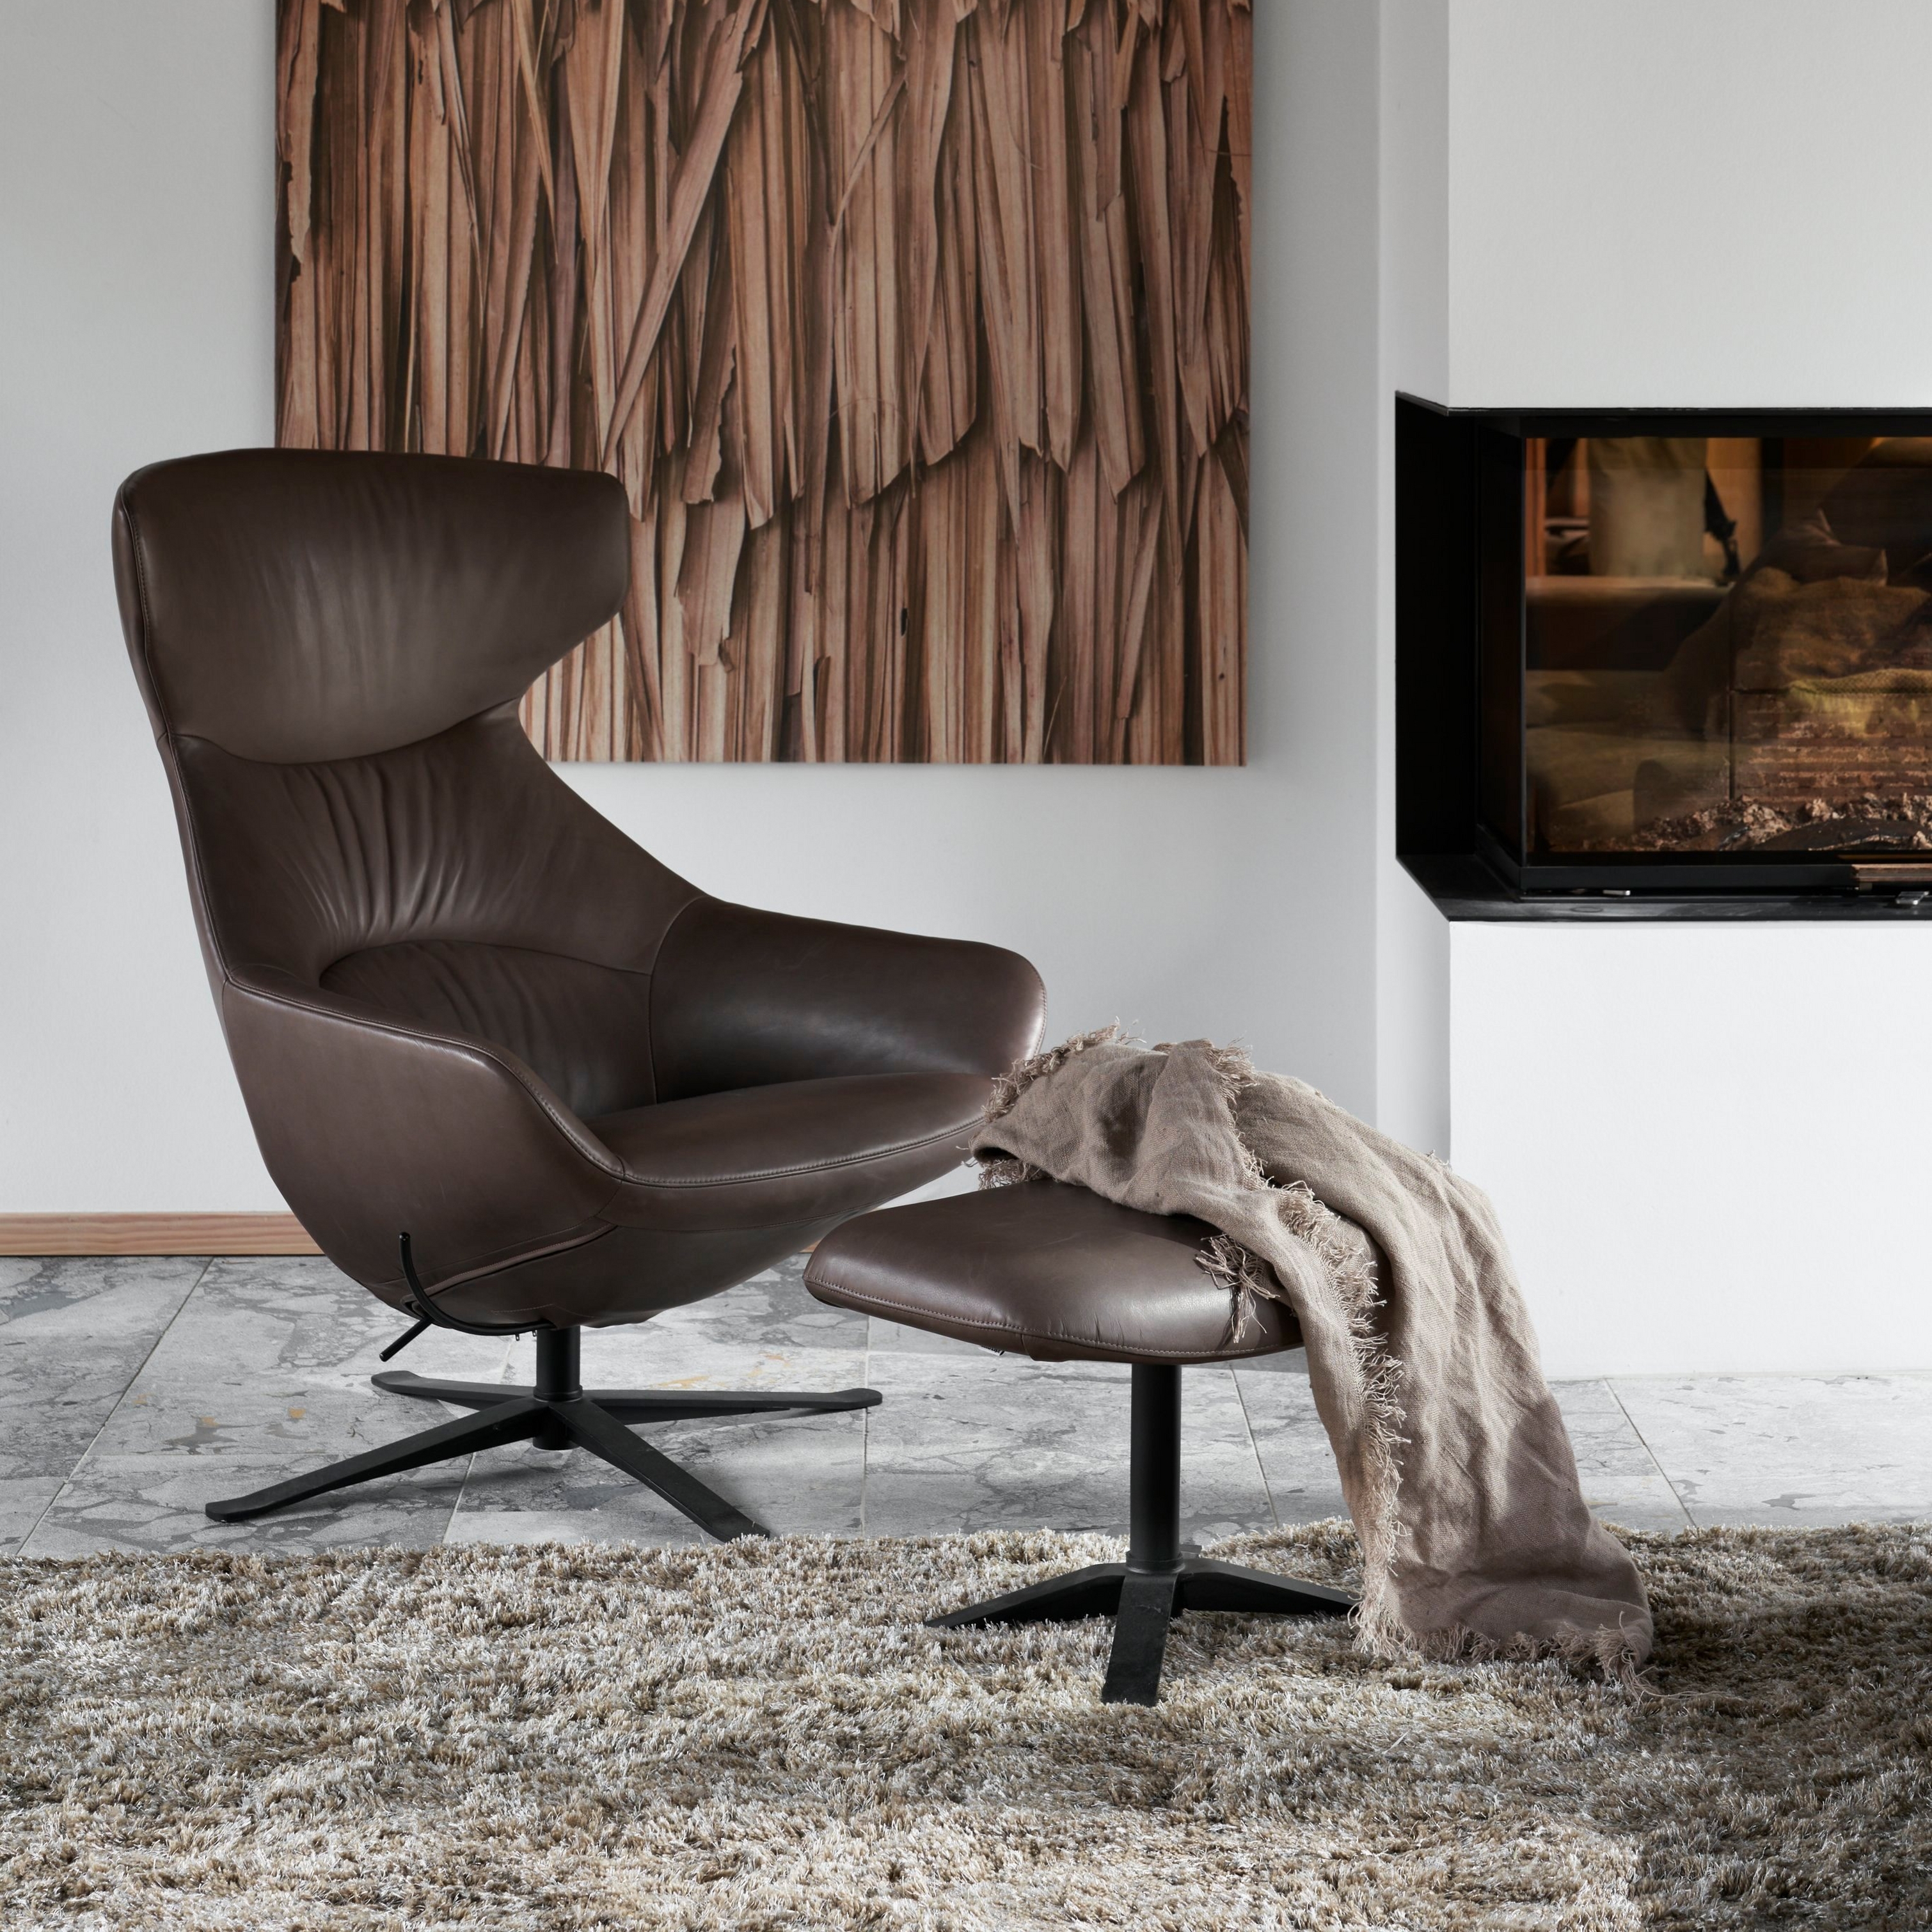 Modern brown leather chair with ottoman, shag rug, wooden art, and fireplace.